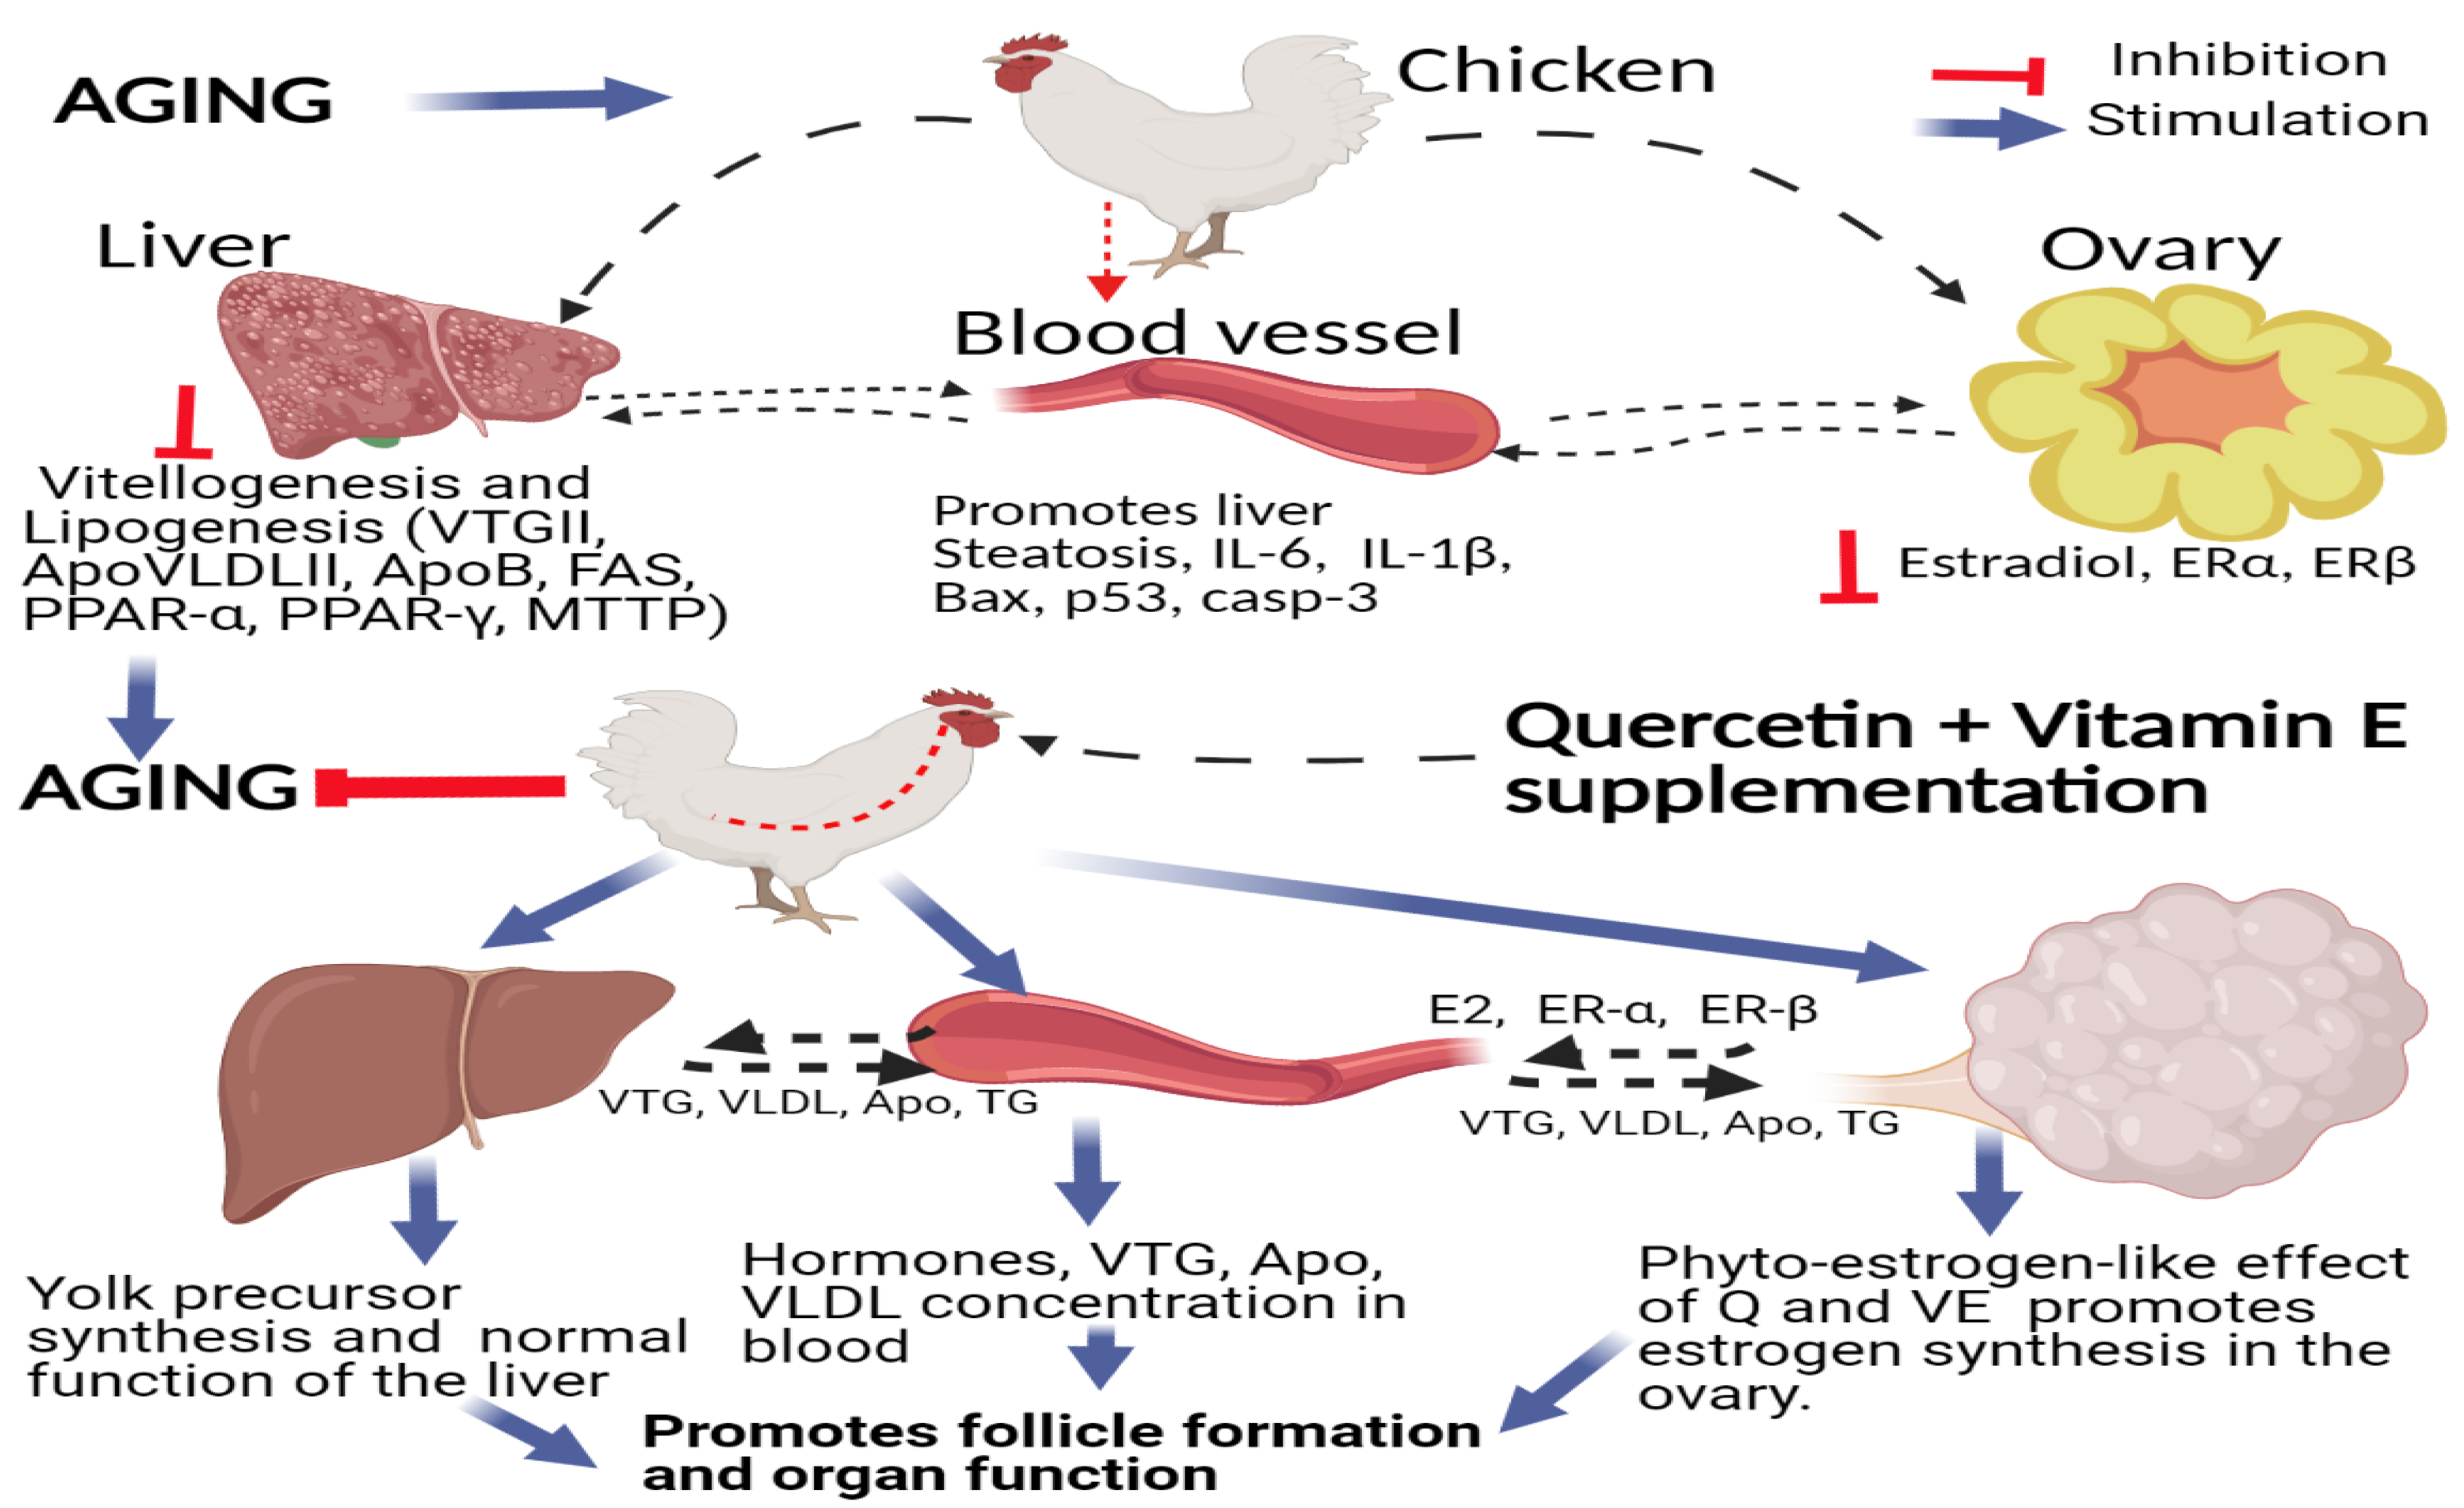 Animals Free Full Text Combination Of Quercetin And Vitamin E Supplementation Promotes Yolk Precursor Synthesis And Follicle Development In Aging Breeder Hens Via Liver Blood Ovary Signal Axis Html